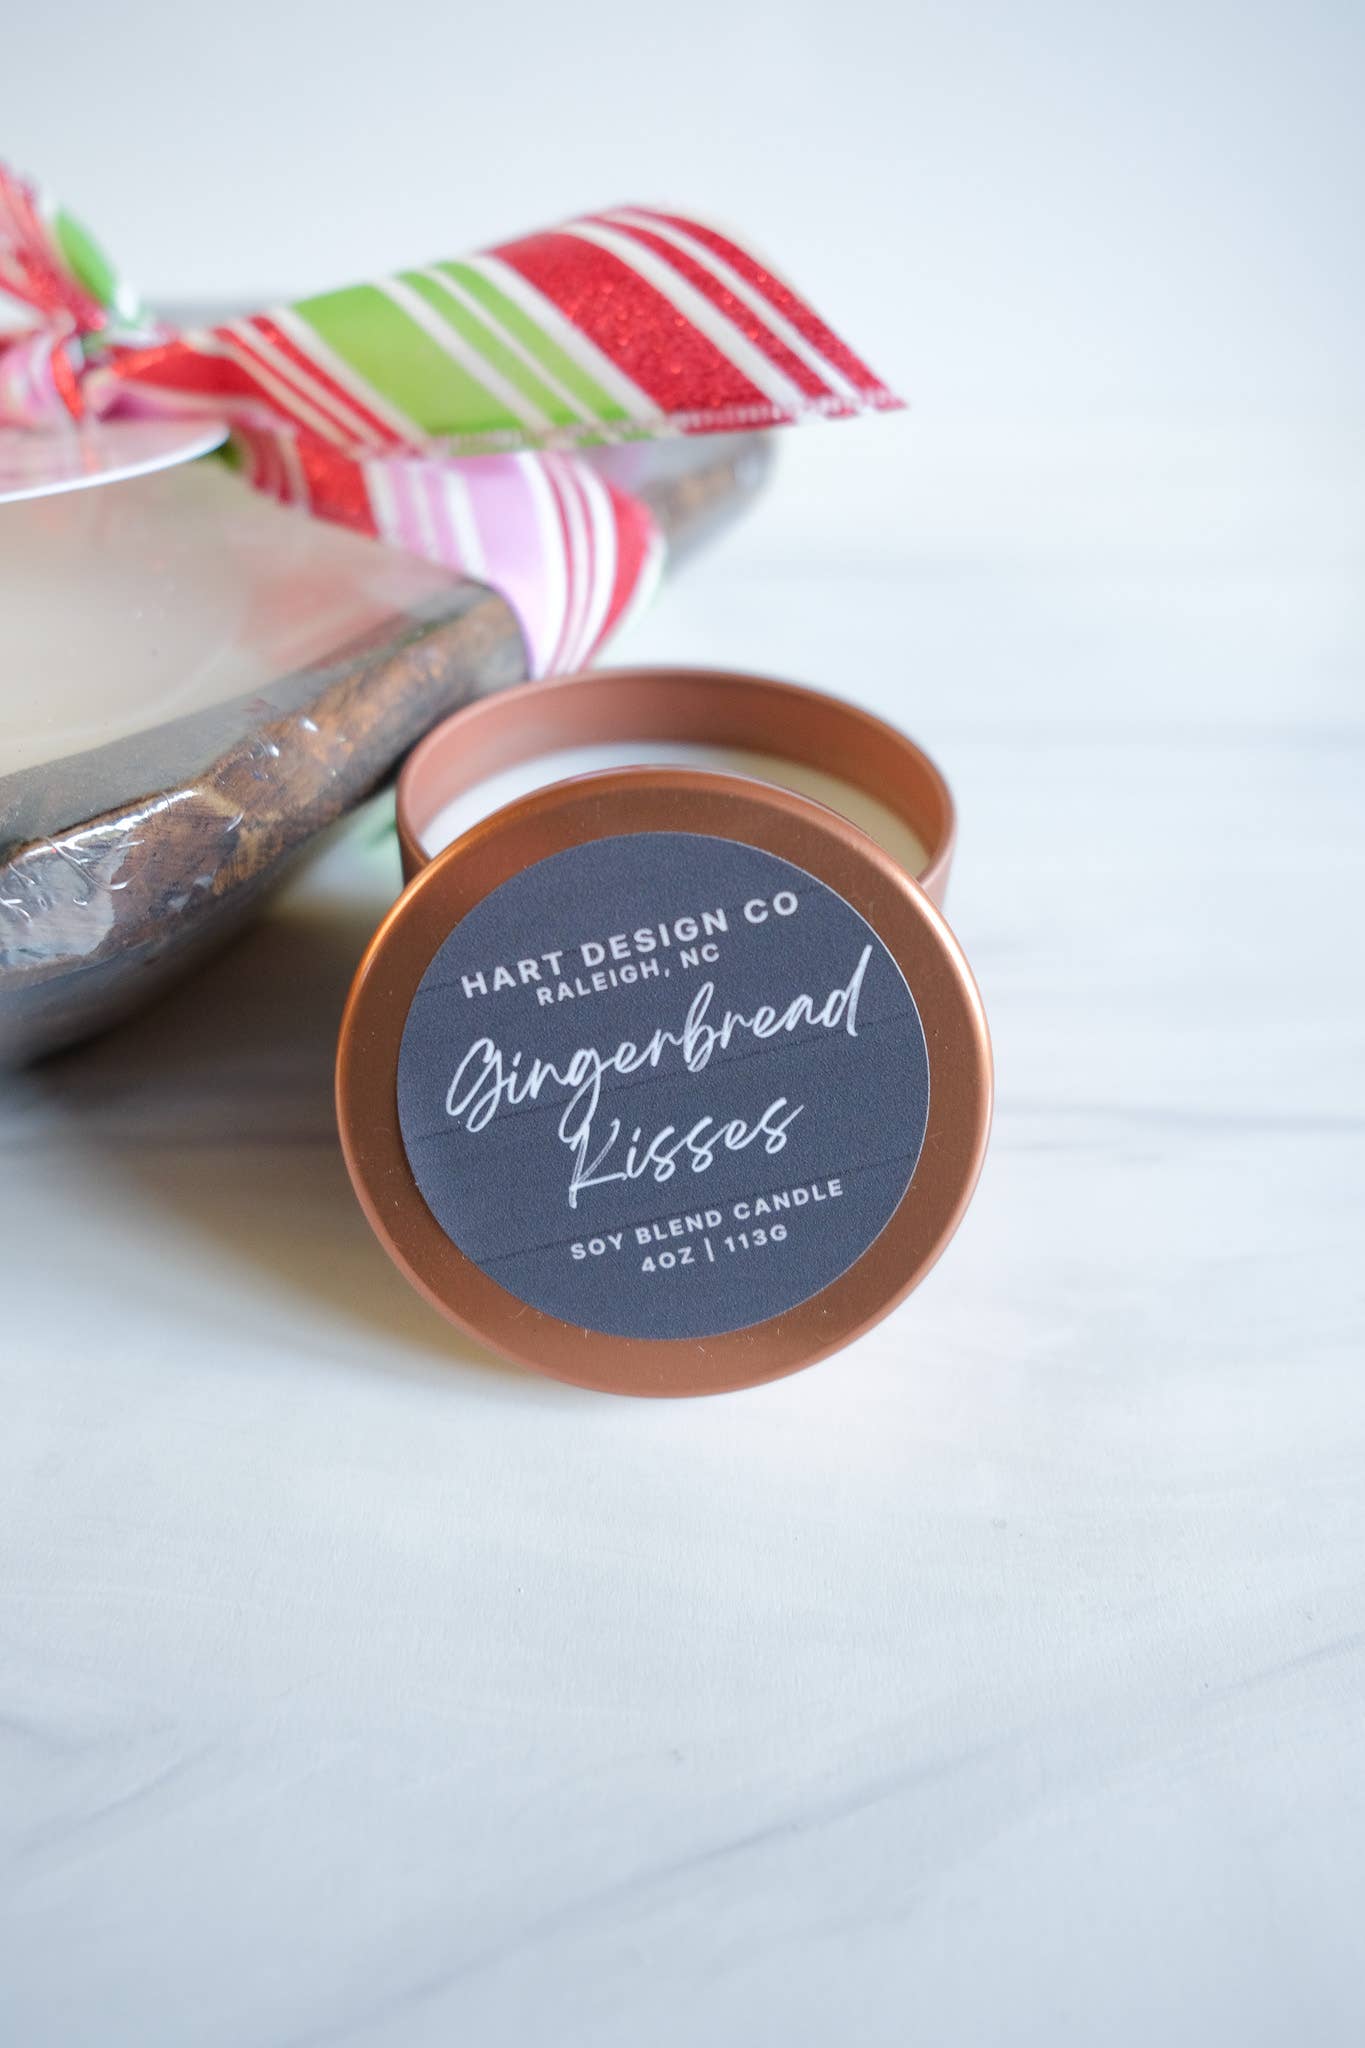 Gingerbread | The Bake Shop LIMITED RELEASE: Mini Tin